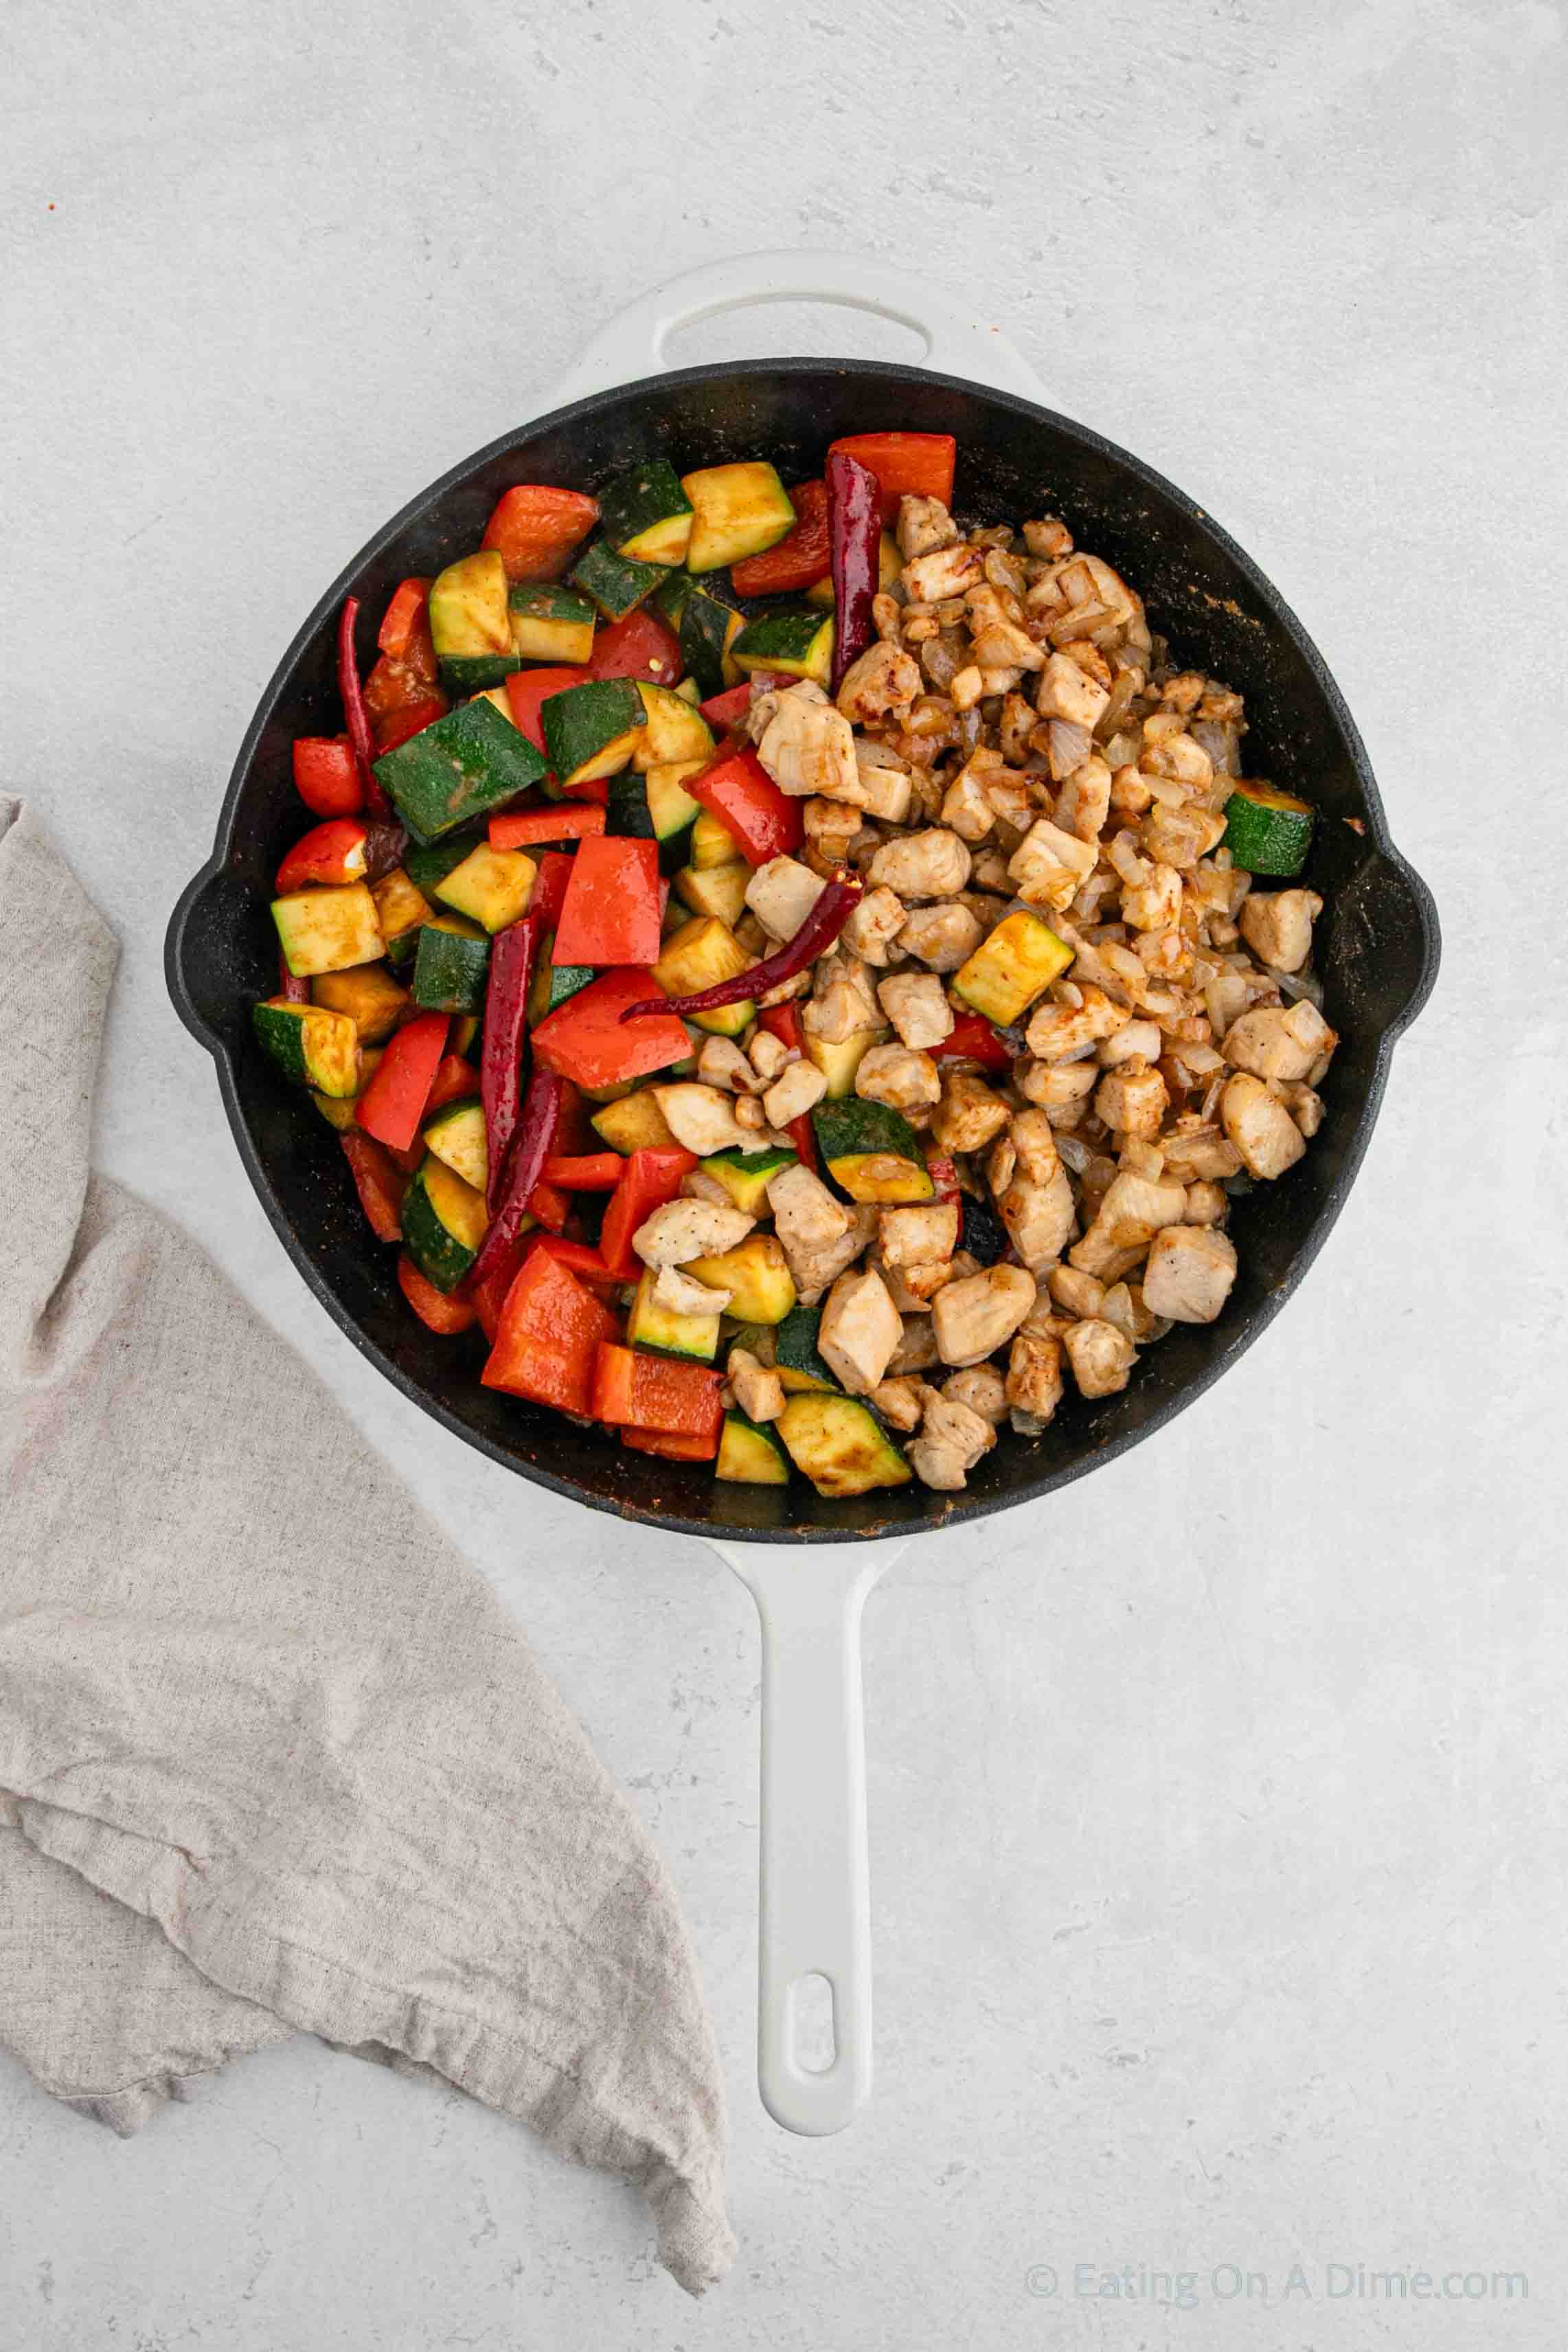 Cooked diced chicken and roasted vegetables in a skillet